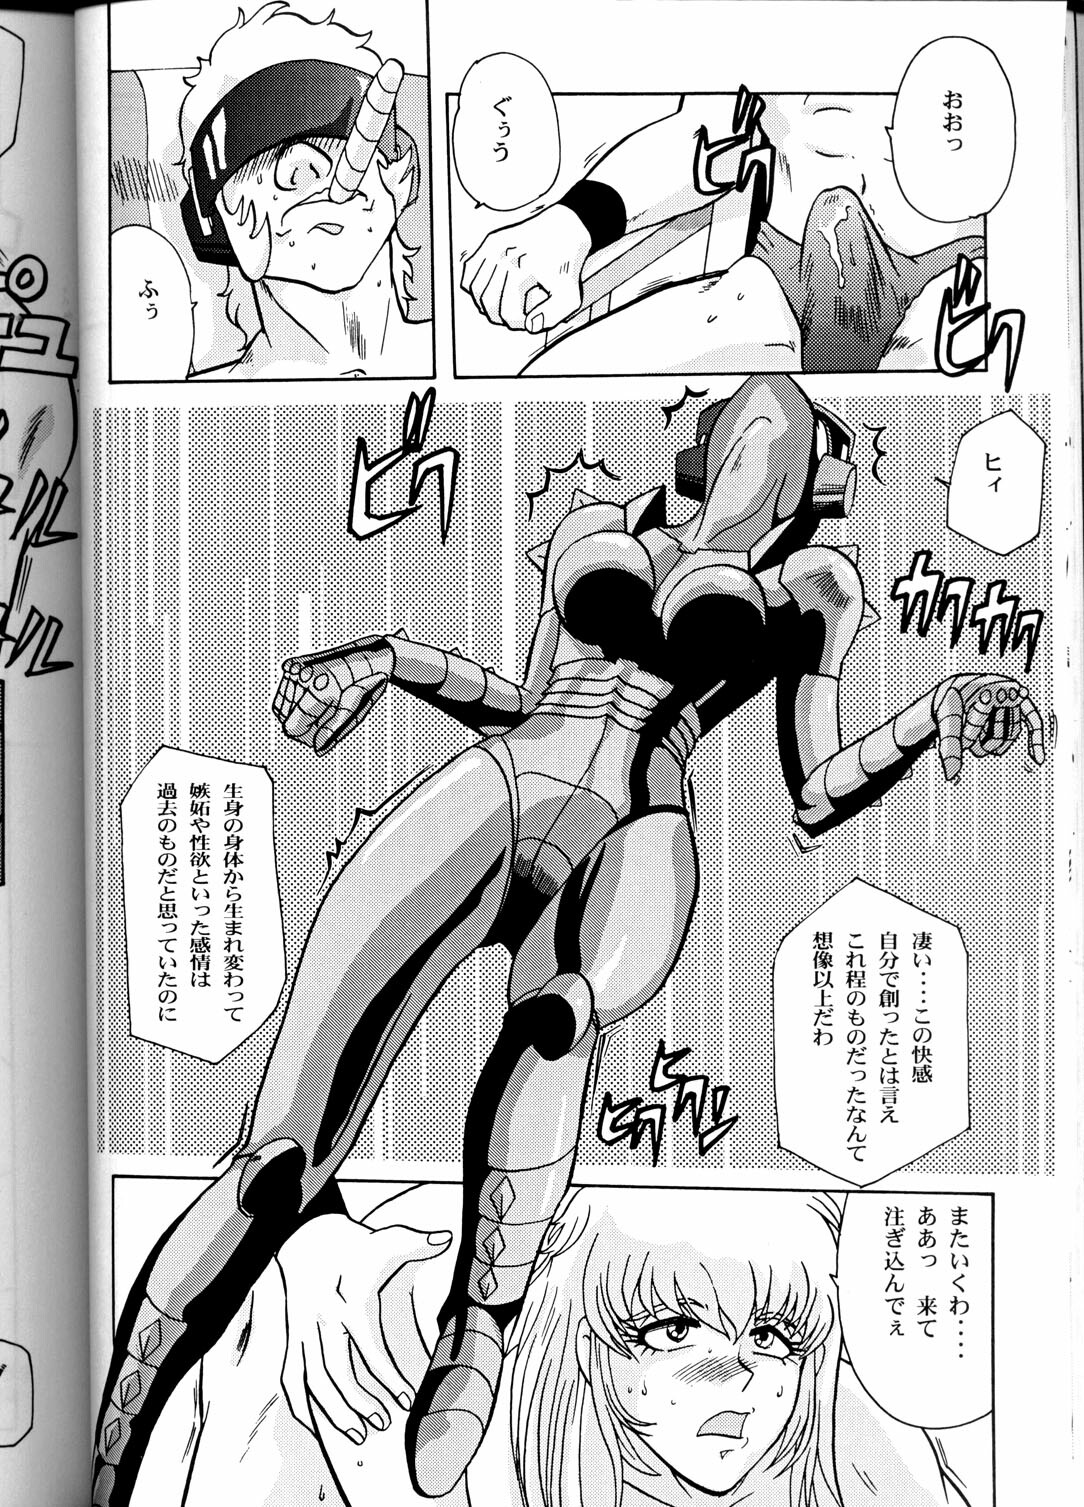 (C58) [T2 UNIT (Various)] OH! Robo Musume Chuushuugou! (Various) page 50 full